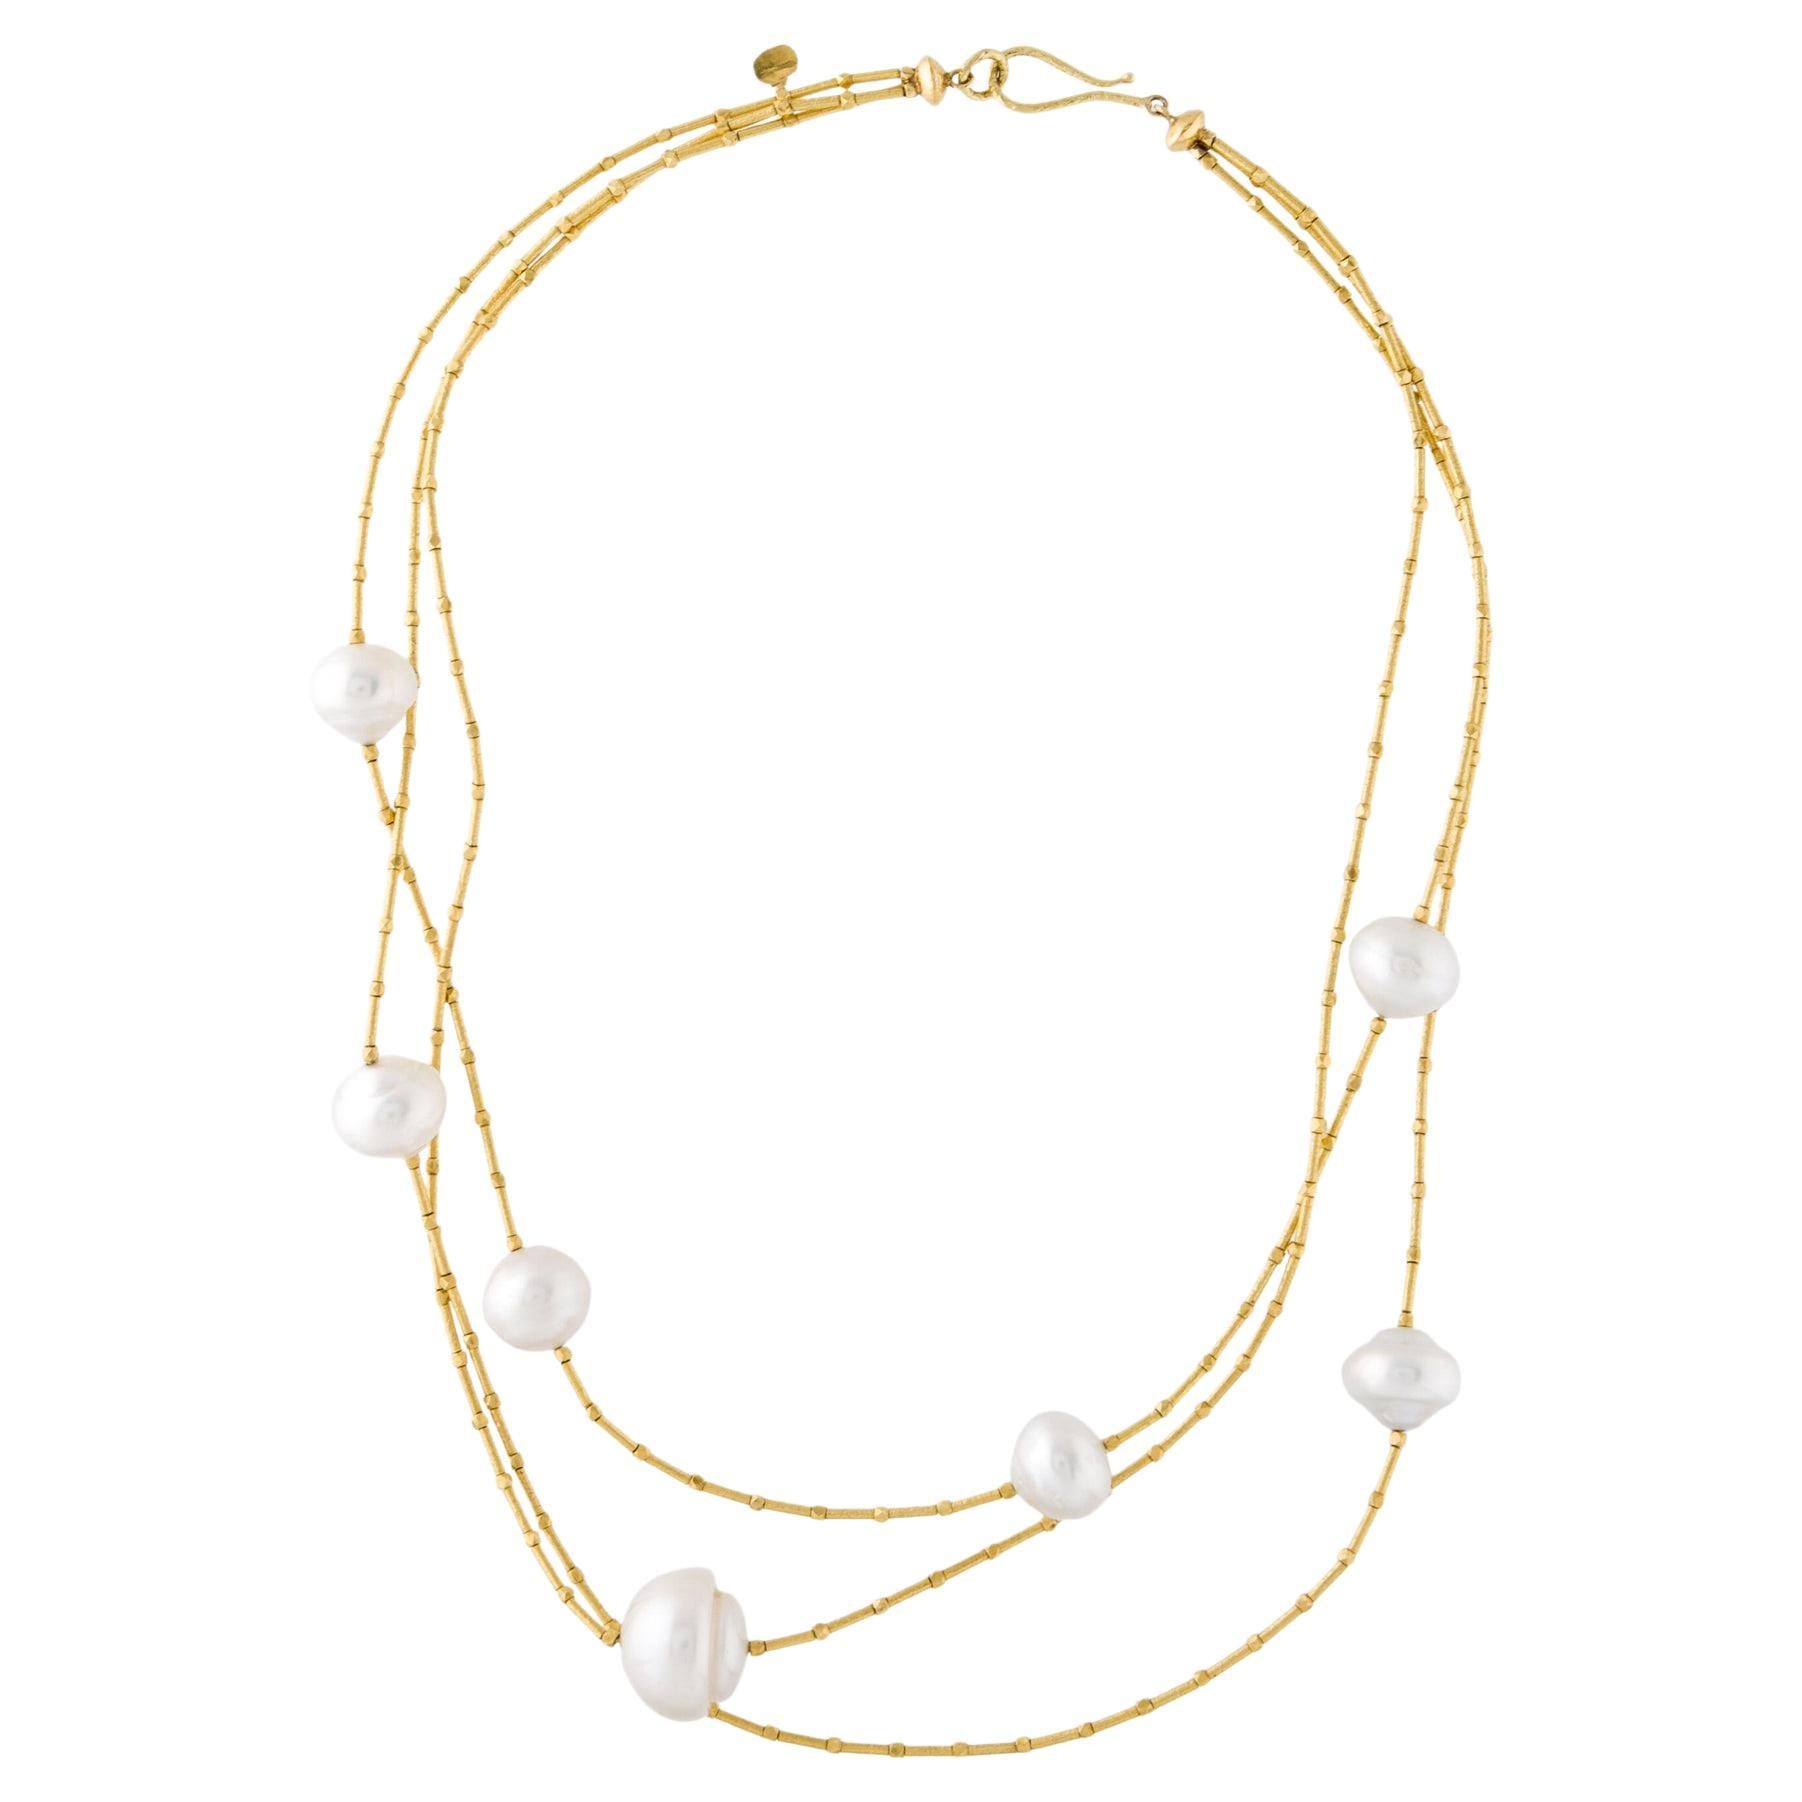 22 Karat Yellow Gold White Baroque Cultured Pearls with Hook Closure Necklace